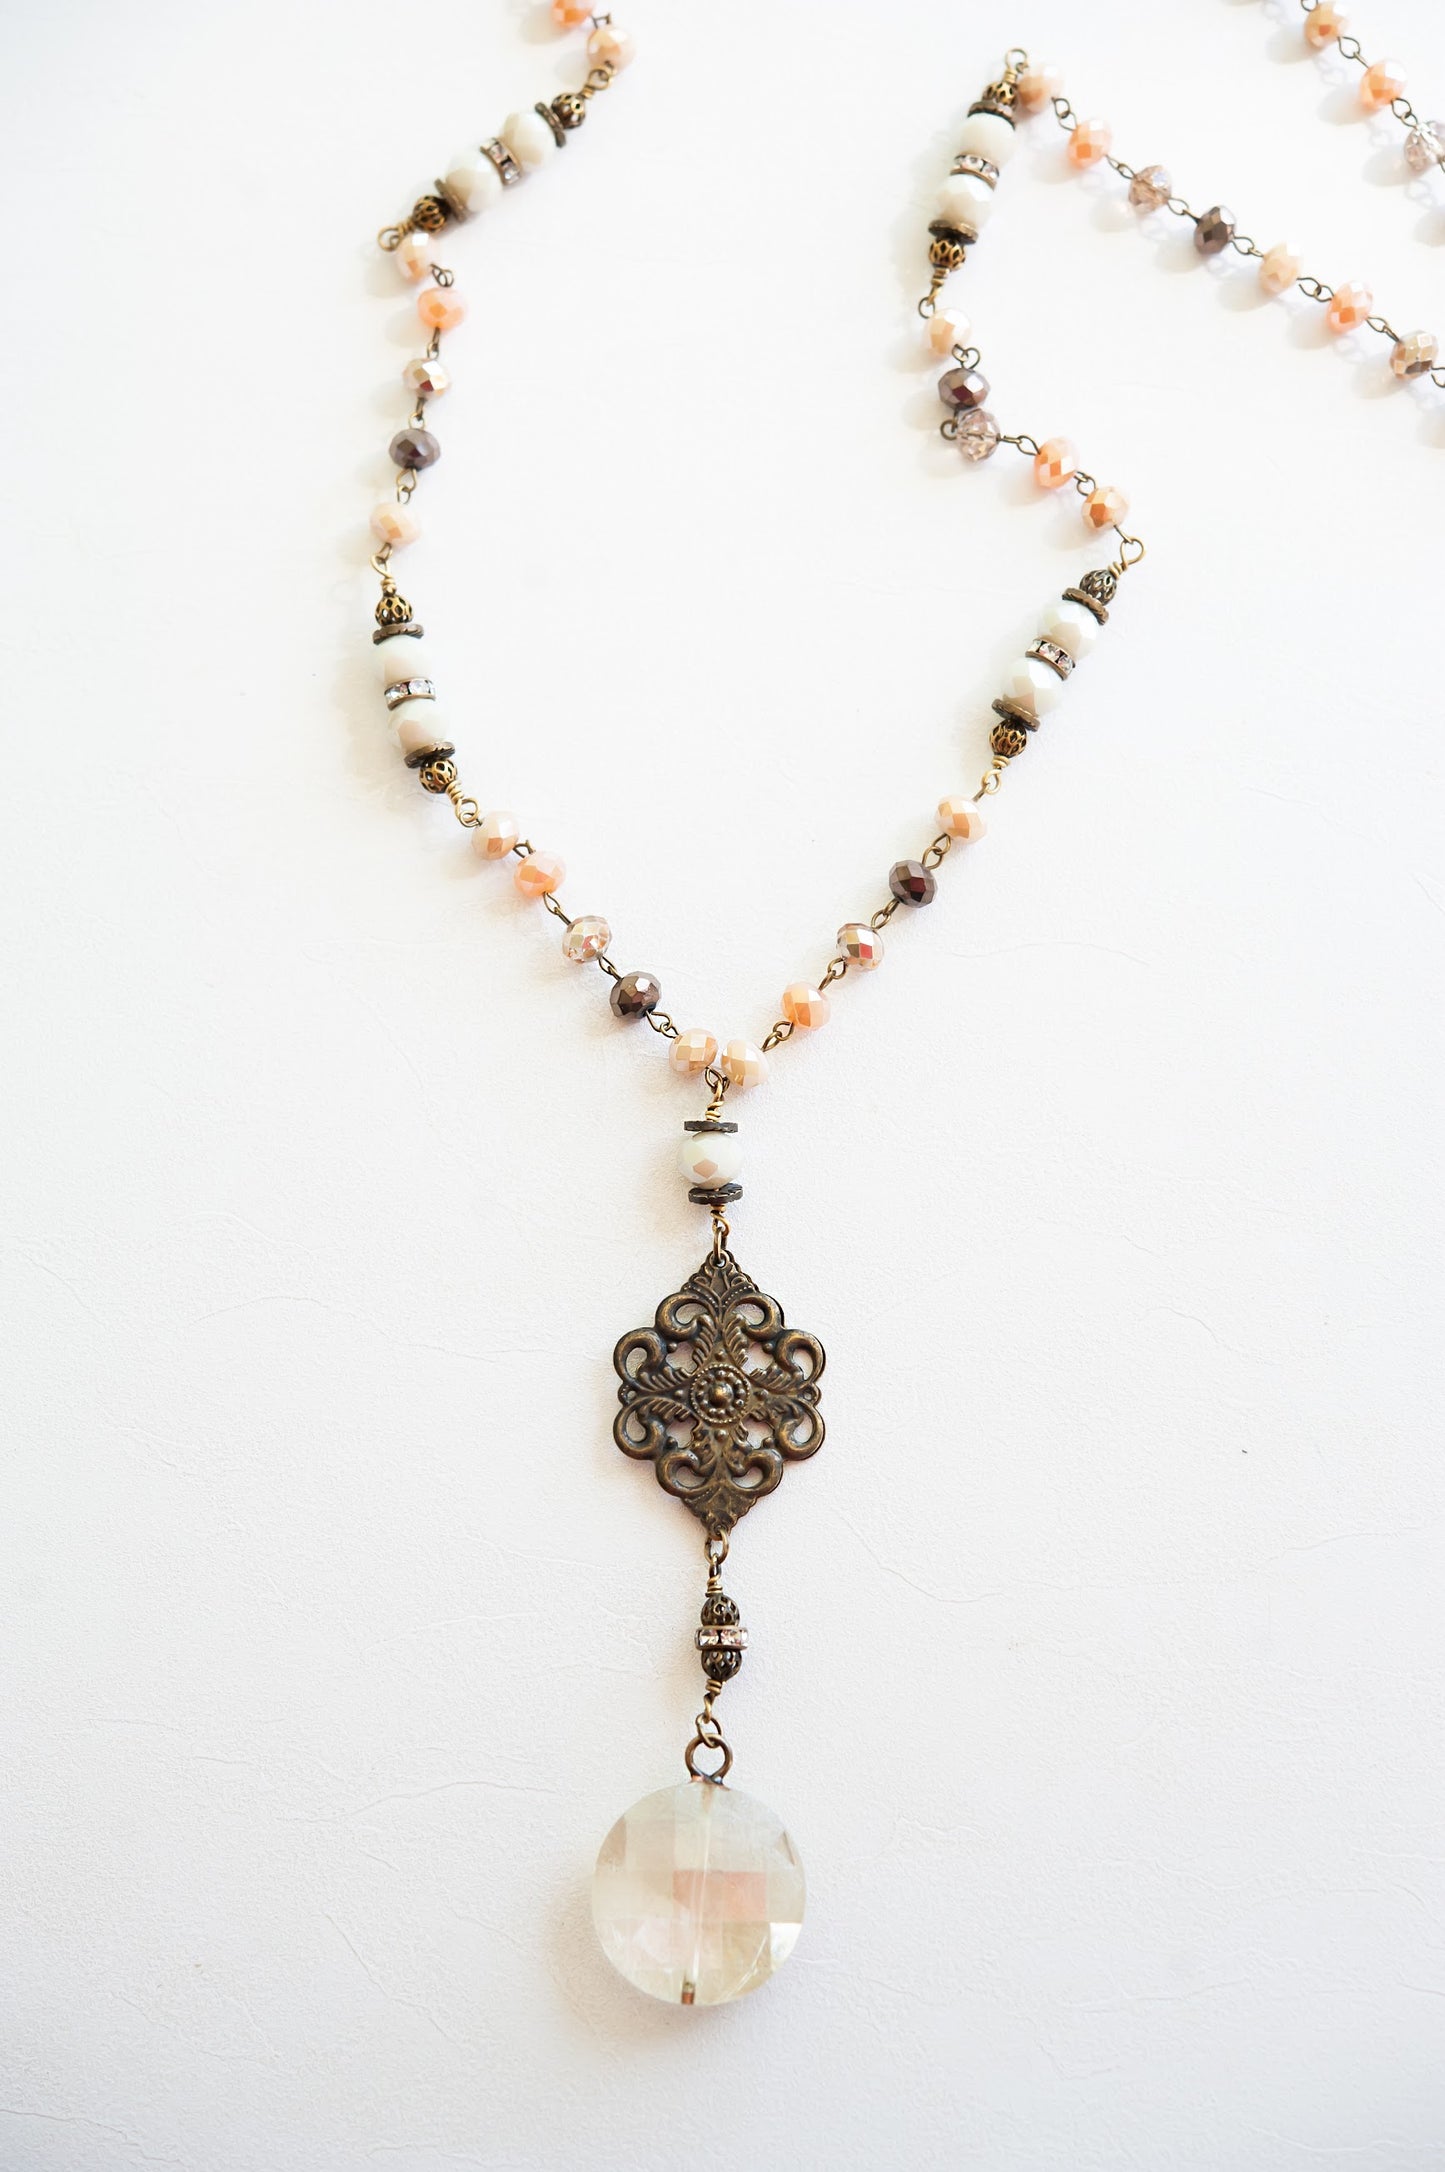 Load image into Gallery viewer, Marie Antique Chandelier Pendant Necklace | Vintage Burnished Bronze Filigree and Crystal Drop Pendant | Burnished Bronze Chain with Warm Blush Beads | Long Antique Royal Necklace
